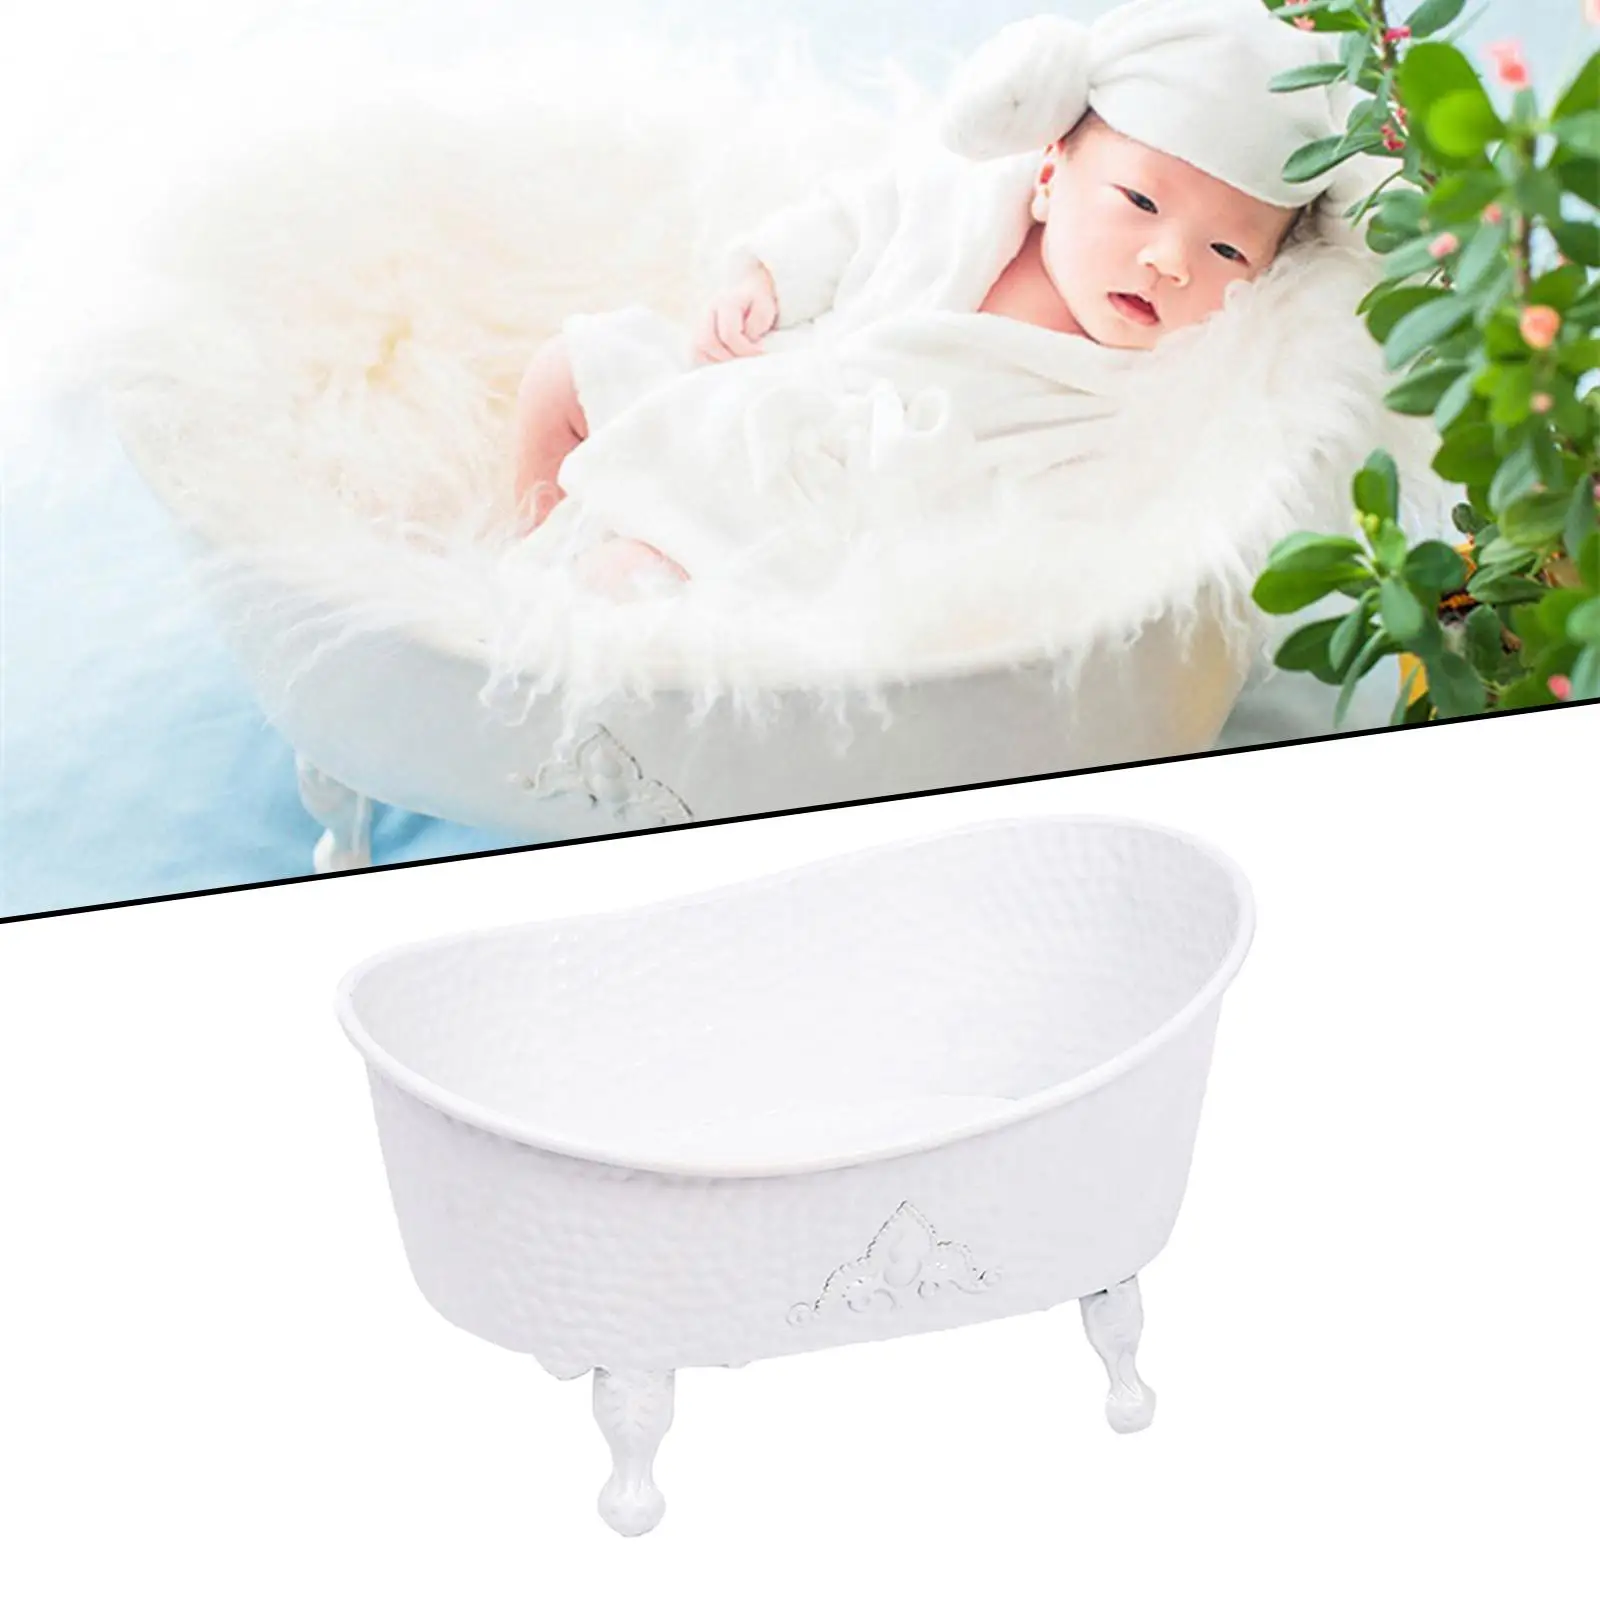 Iron Photography Props Bathtub Backdrops Fittings Decoration White DIY for Holiday